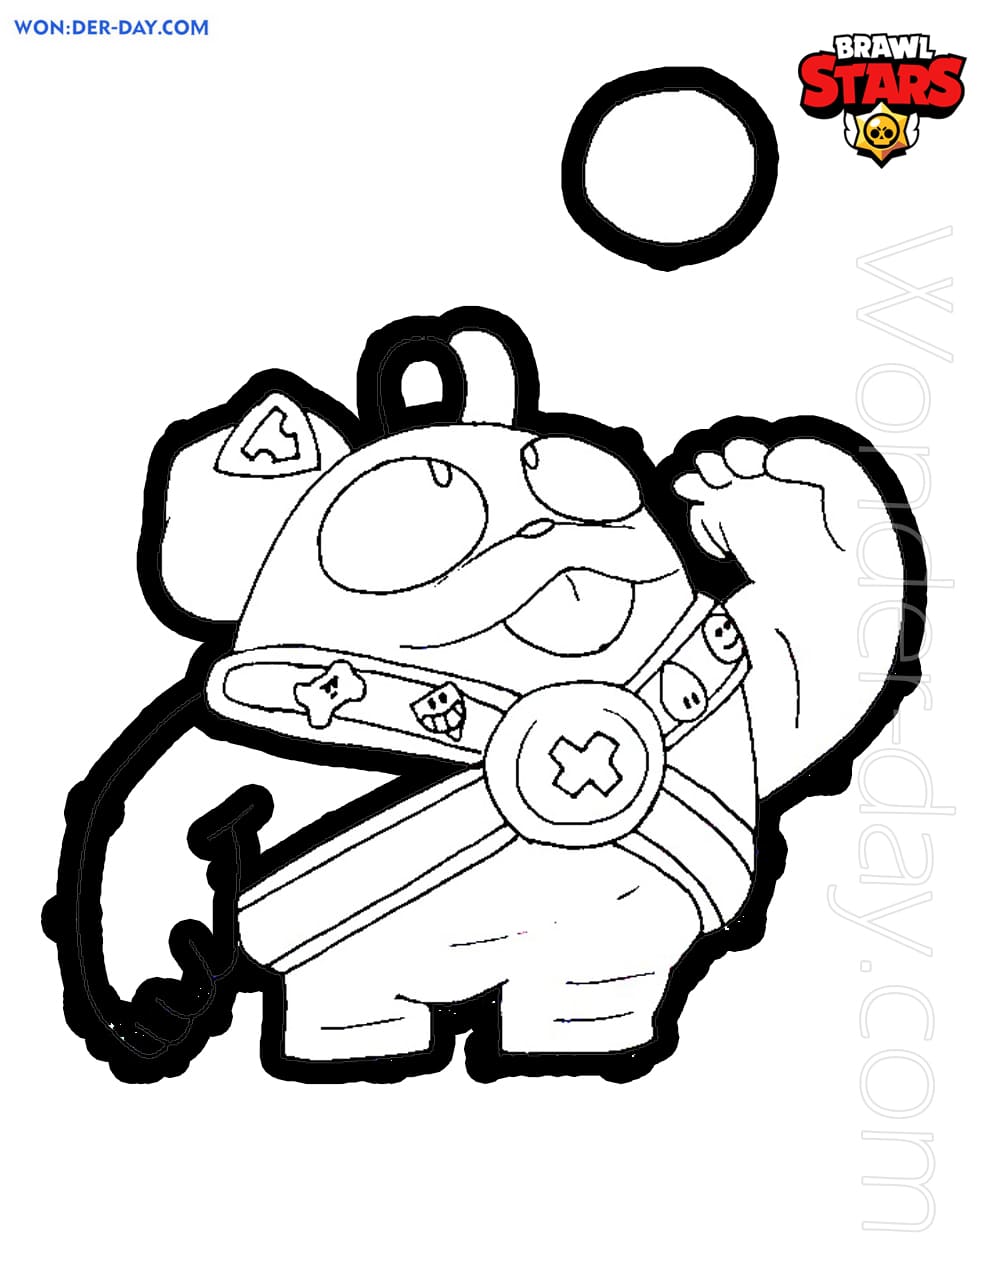 Squeak Brawl Stars Coloring Pages Wonder Day Coloring Pages For Children And Adults - dibujos brawl stars squeak